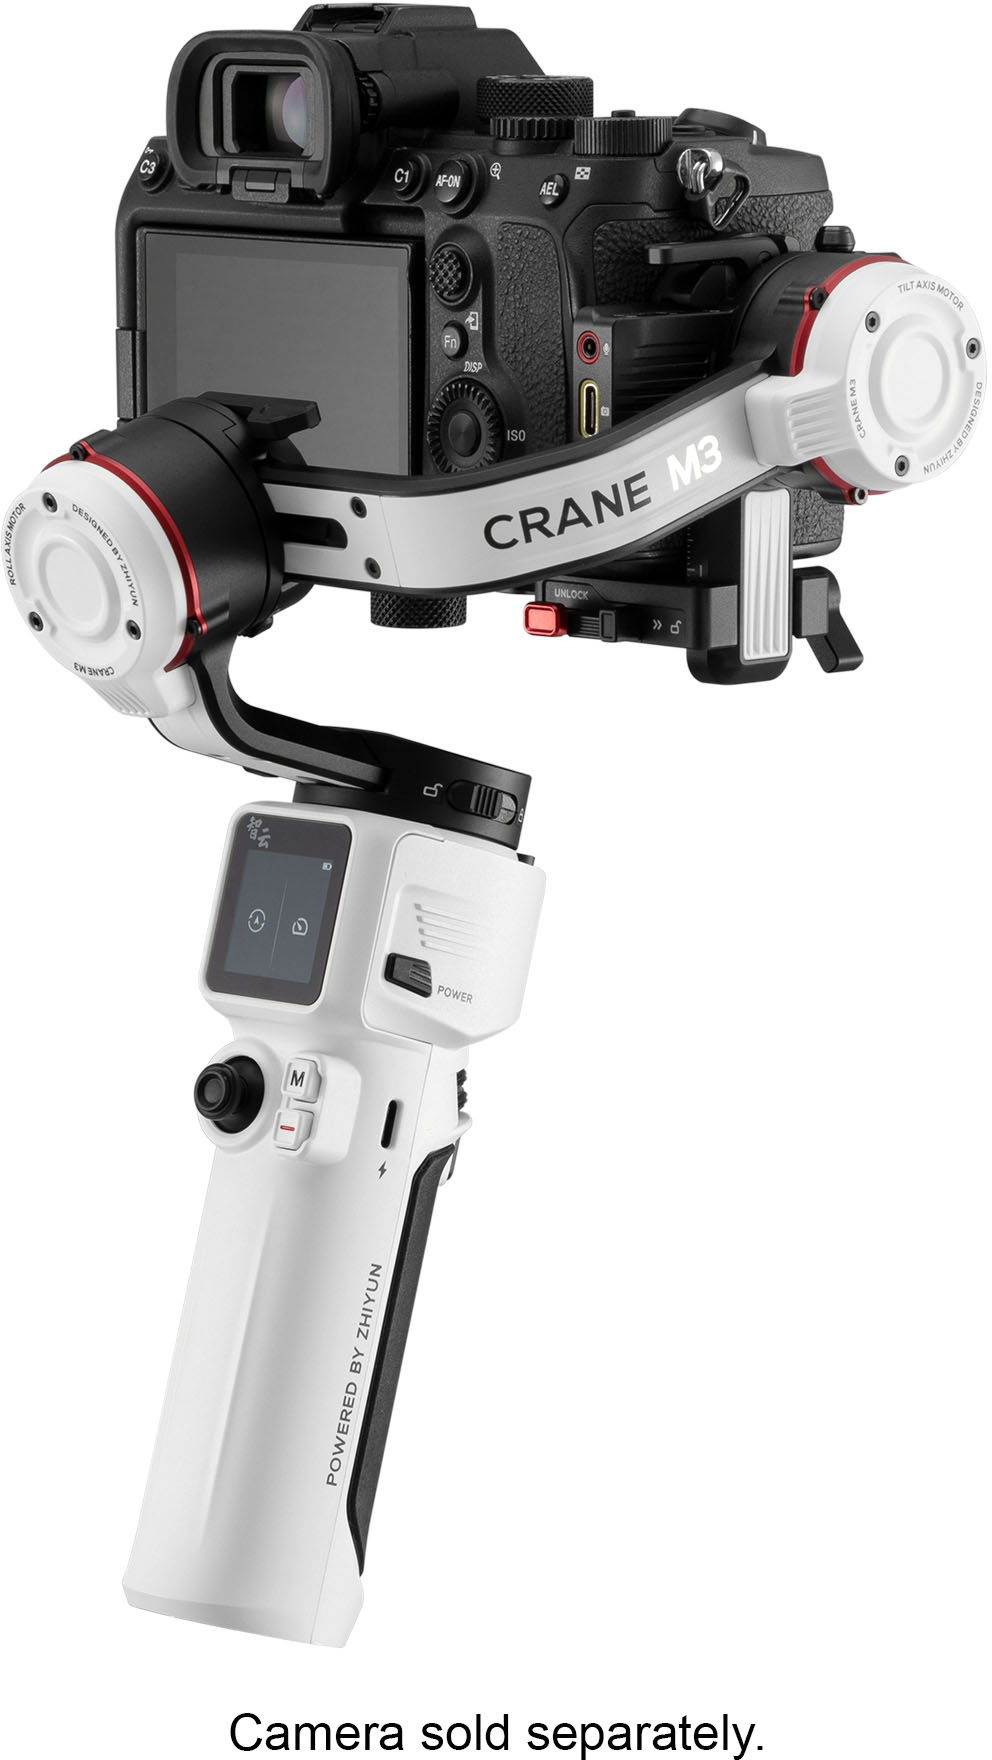 Zhiyun Crane M3 3-Axis Gimbal Stabilizer for Smartphones, Action